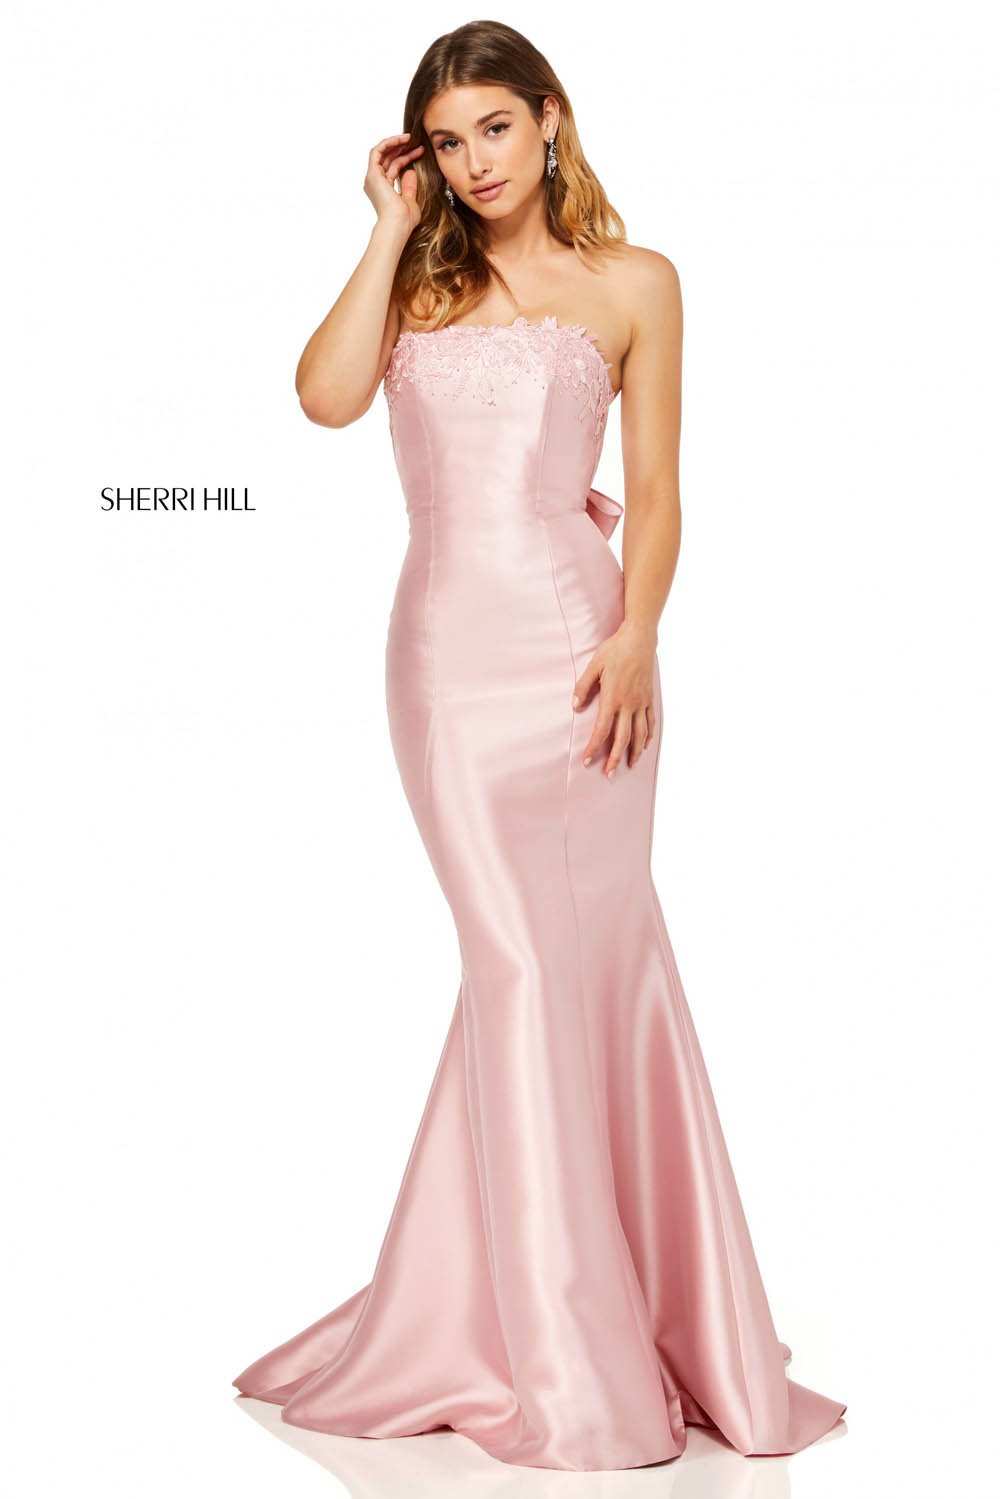 Sherri Hill 52544 dress images in these colors: Ivory, Blush, Black, Red, Light Blue, Yellow.